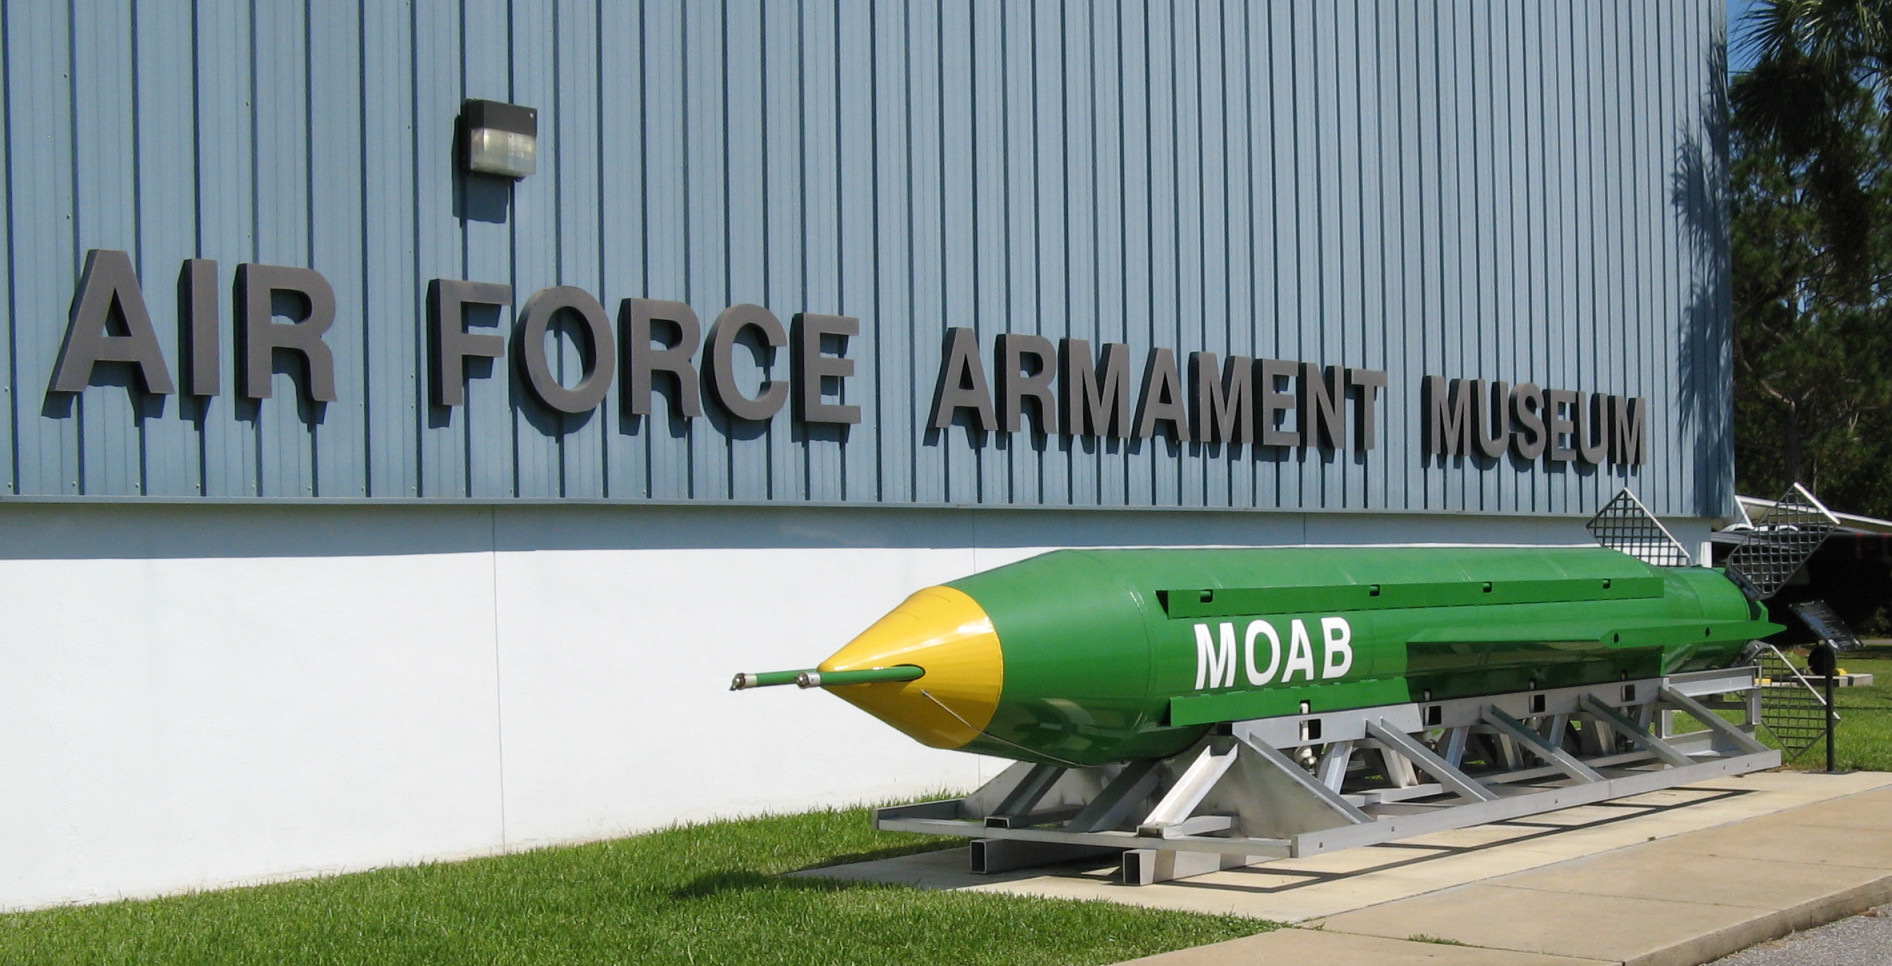 The Air Force Armament Museum in Florida displays an incredibly diverse array of weaponry, including the AMRAAM, the newest air-to-air missile. Photo by Greg Goebel via Wikipedia.